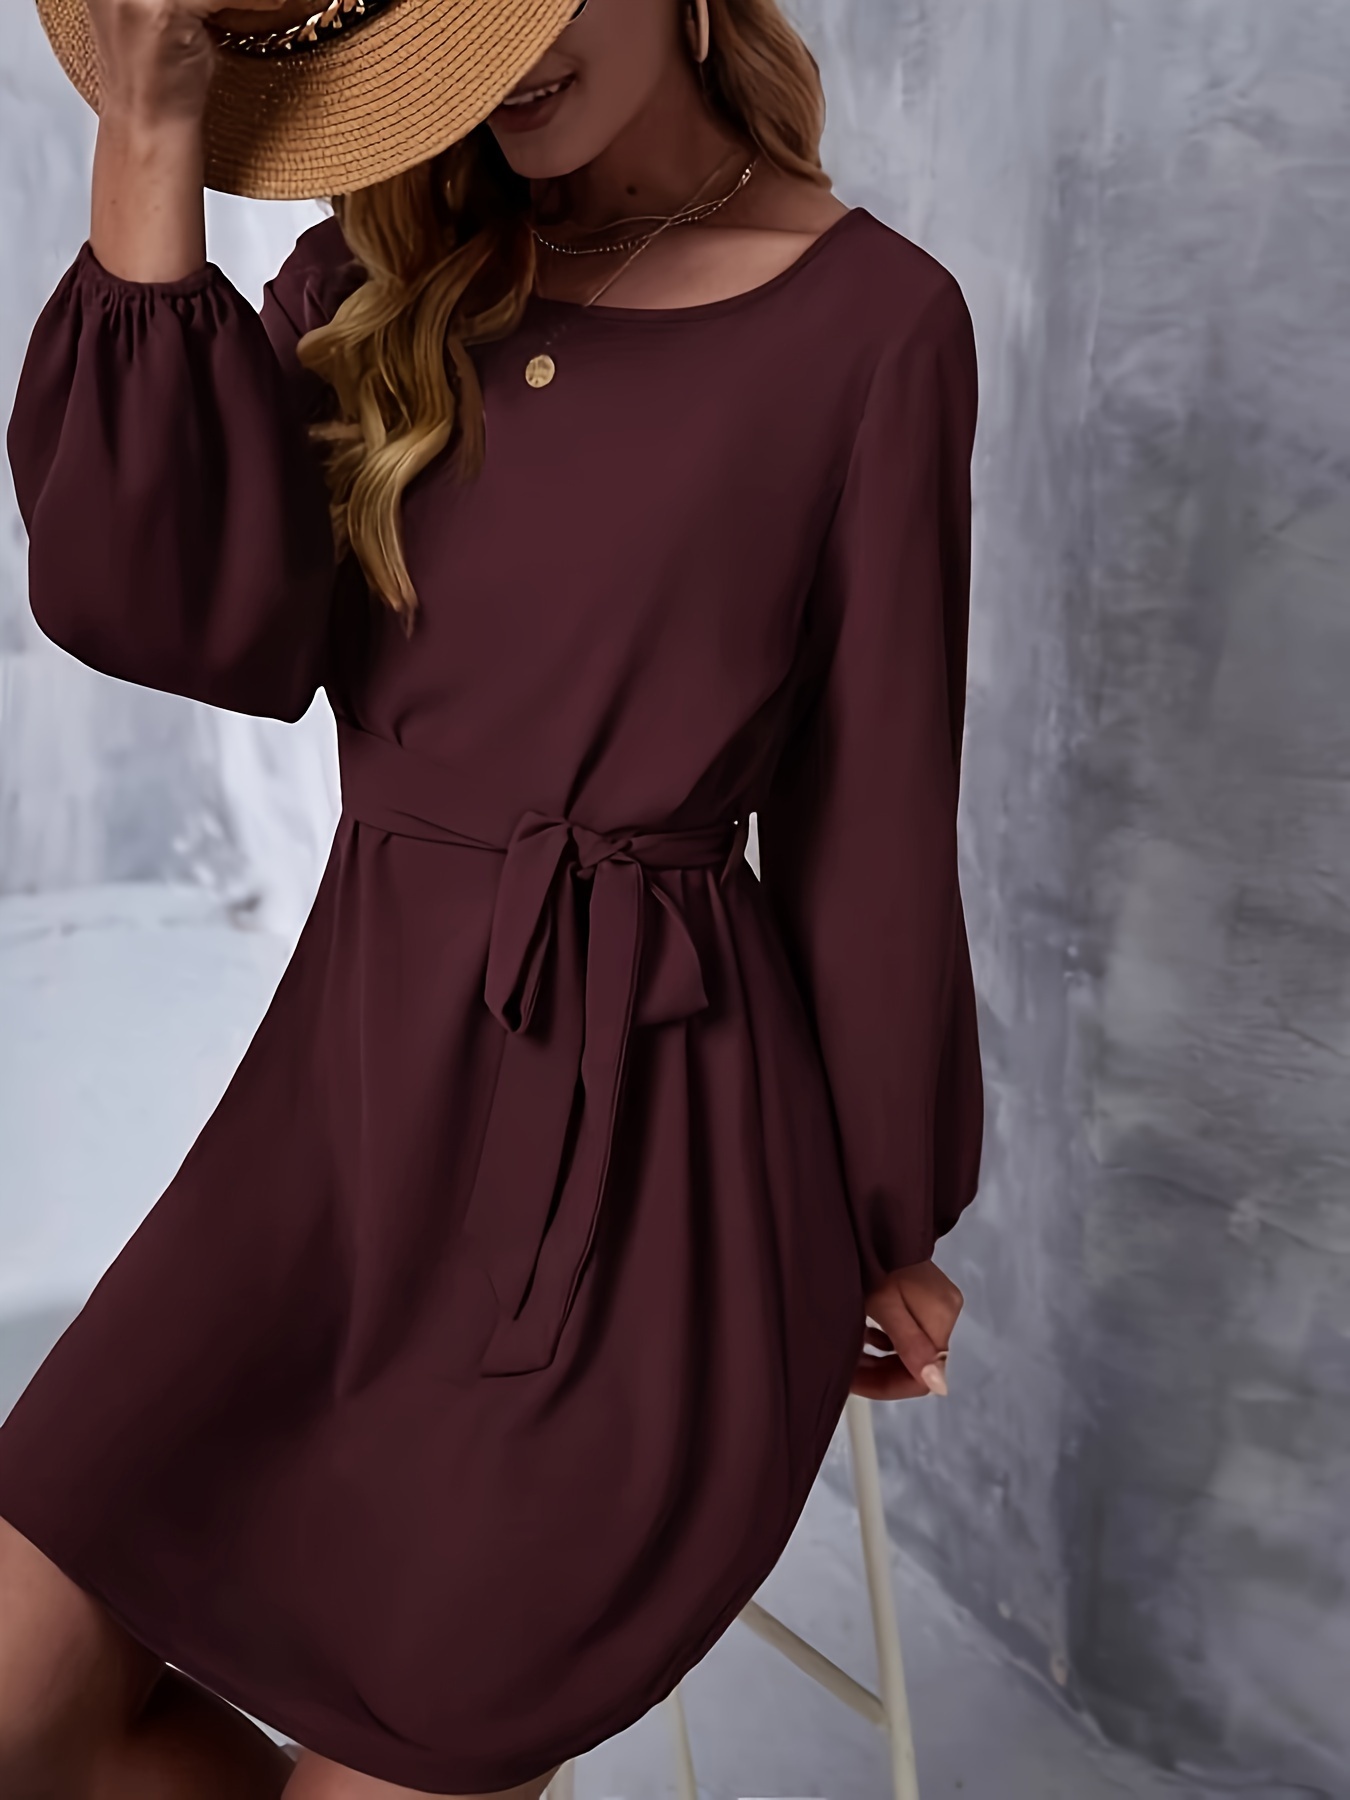 belted solid color dress casual long sleeve dress for spring fall womens clothing